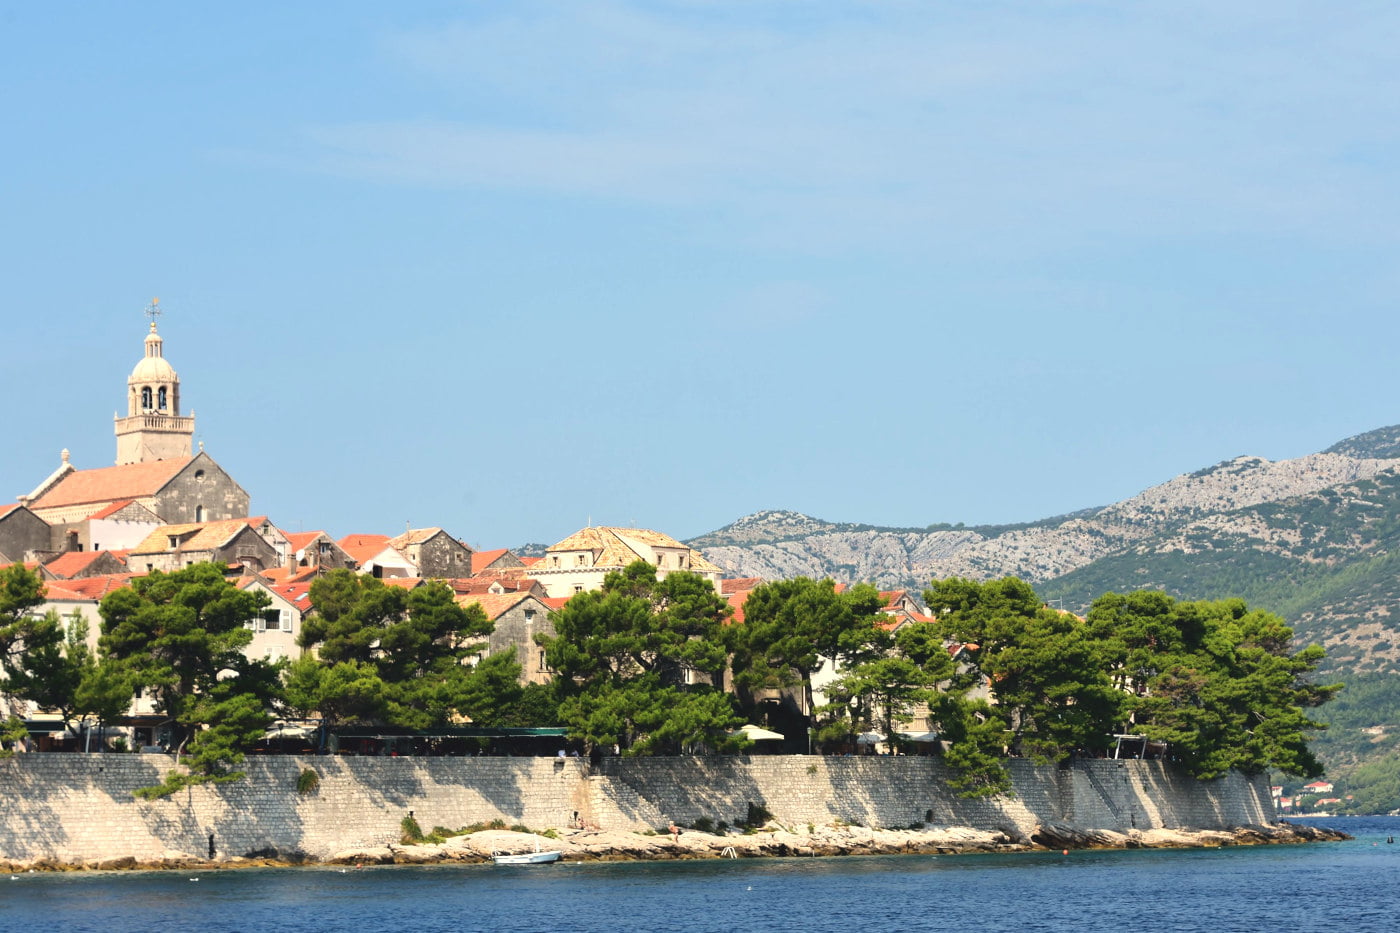 View of the island from the sea